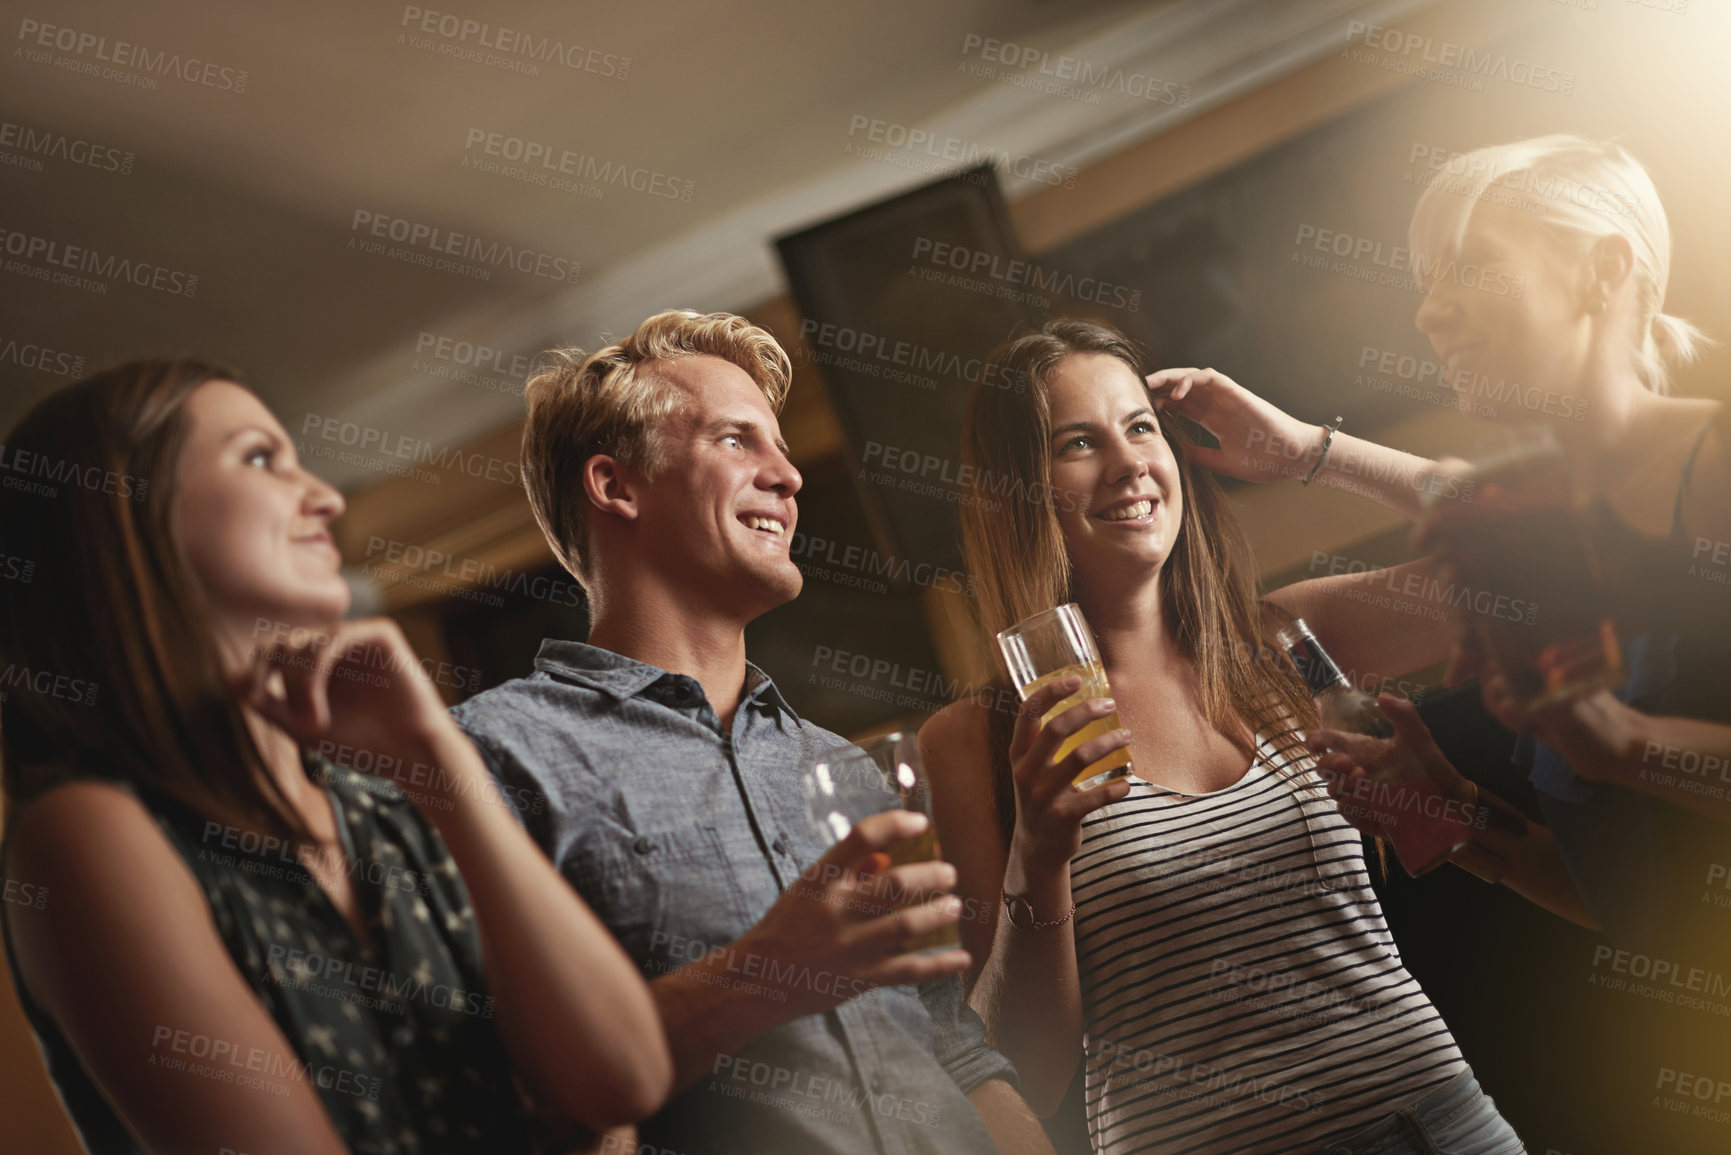 Buy stock photo Shot of a group of friends enjoying themselves in the bar